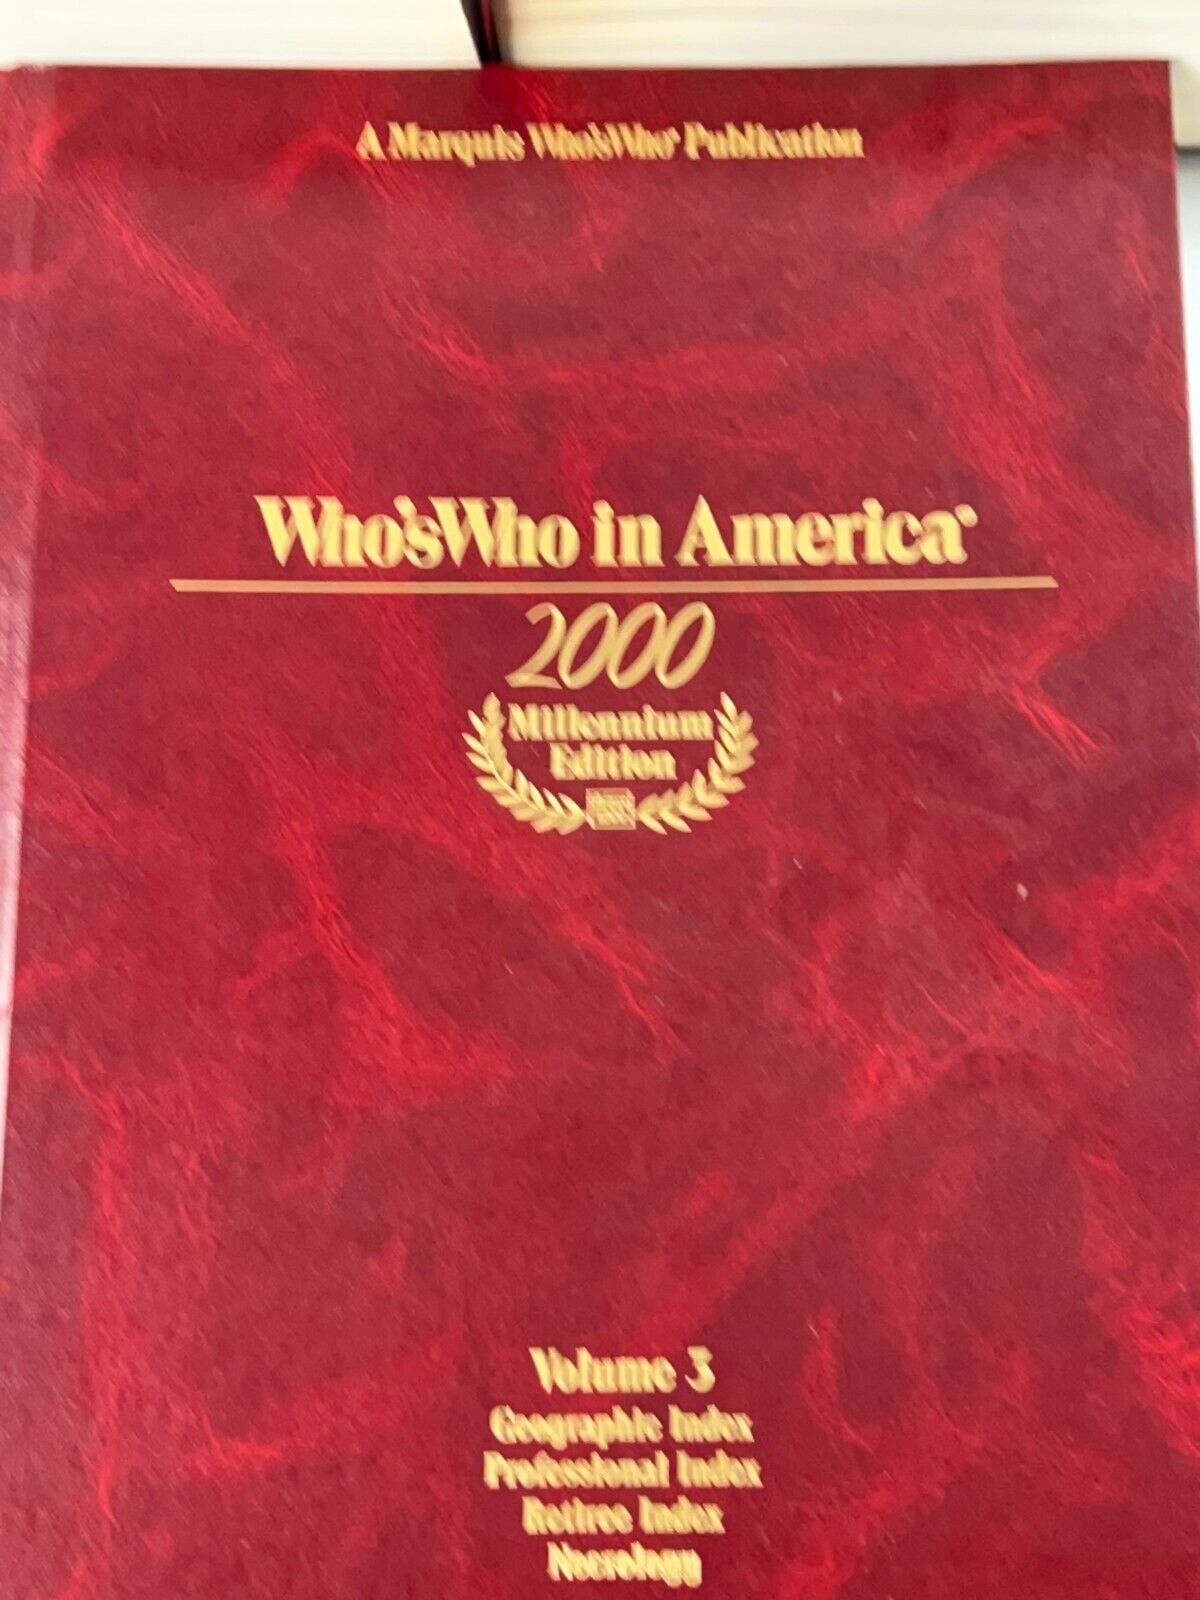 Who s Who in America 2000 Vol. 1-3